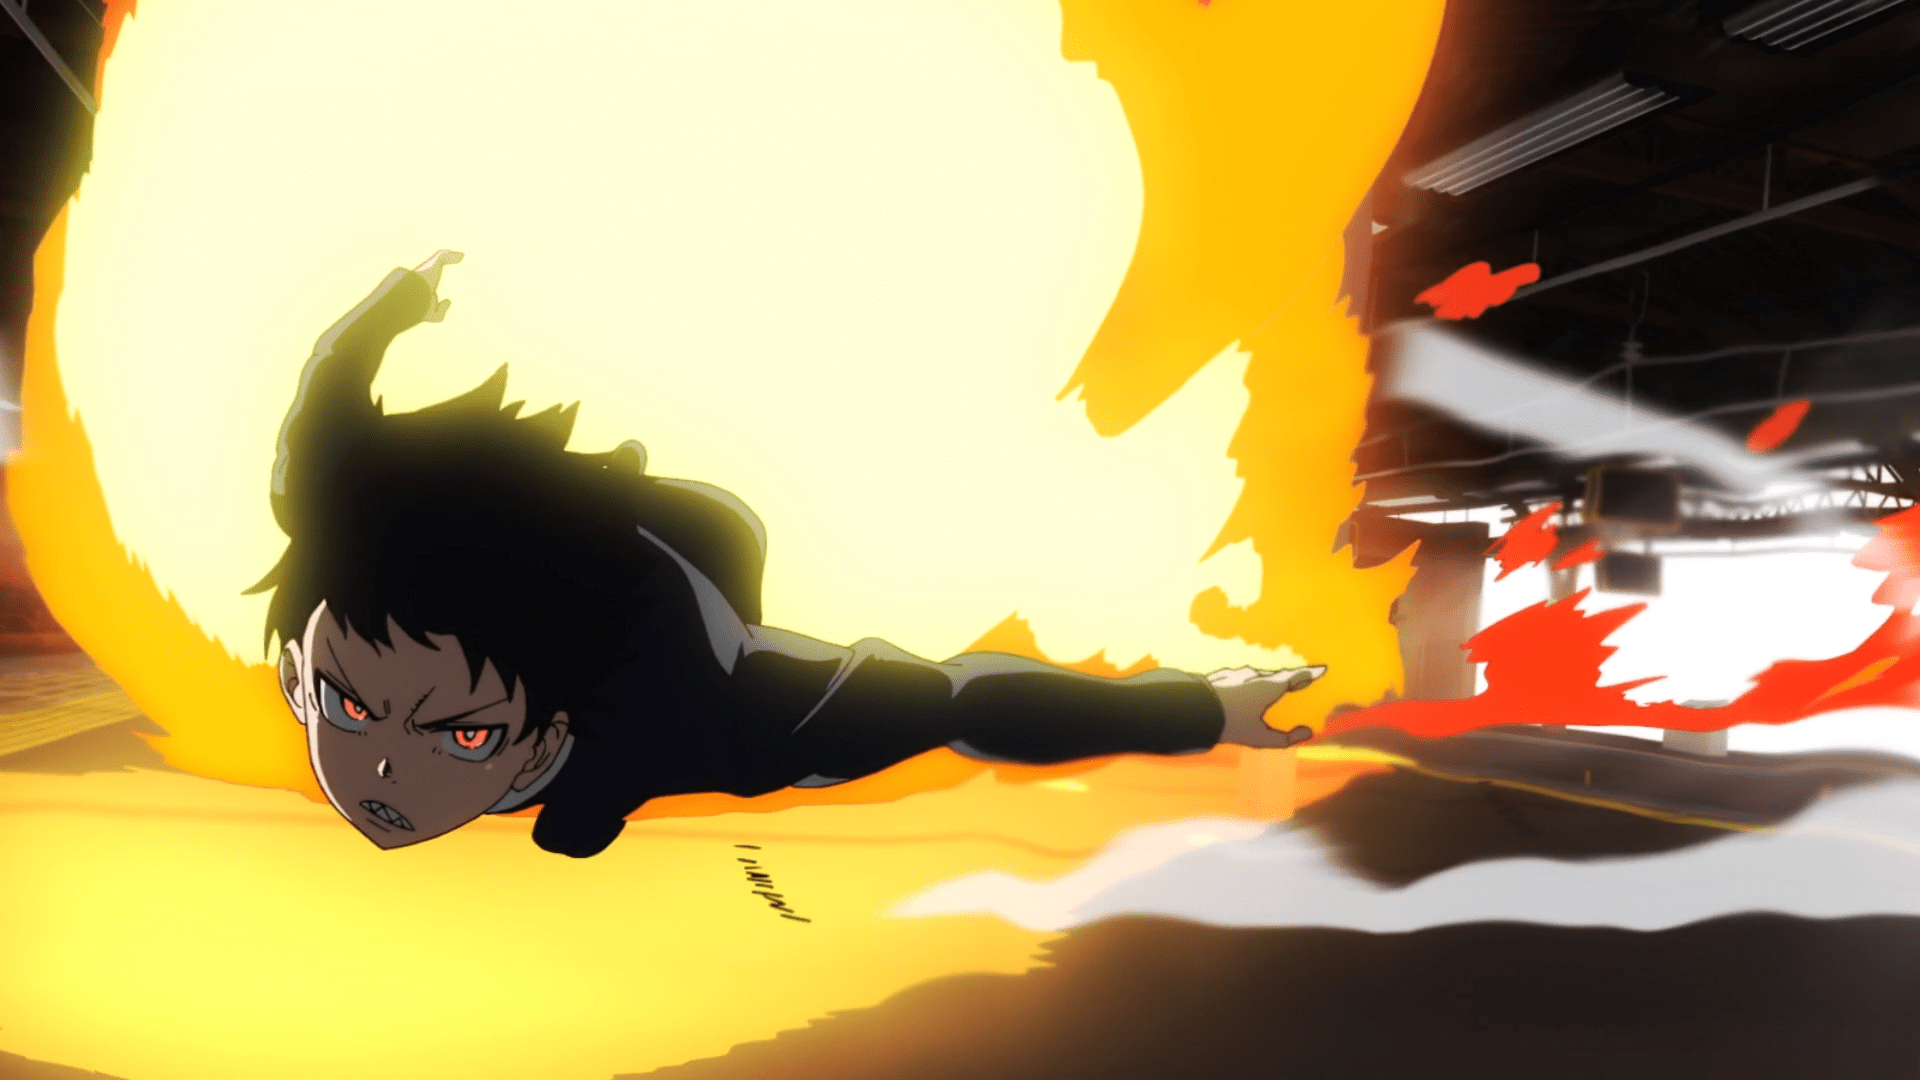 Why It Works Five Highlights of the Fire Force Anime’s